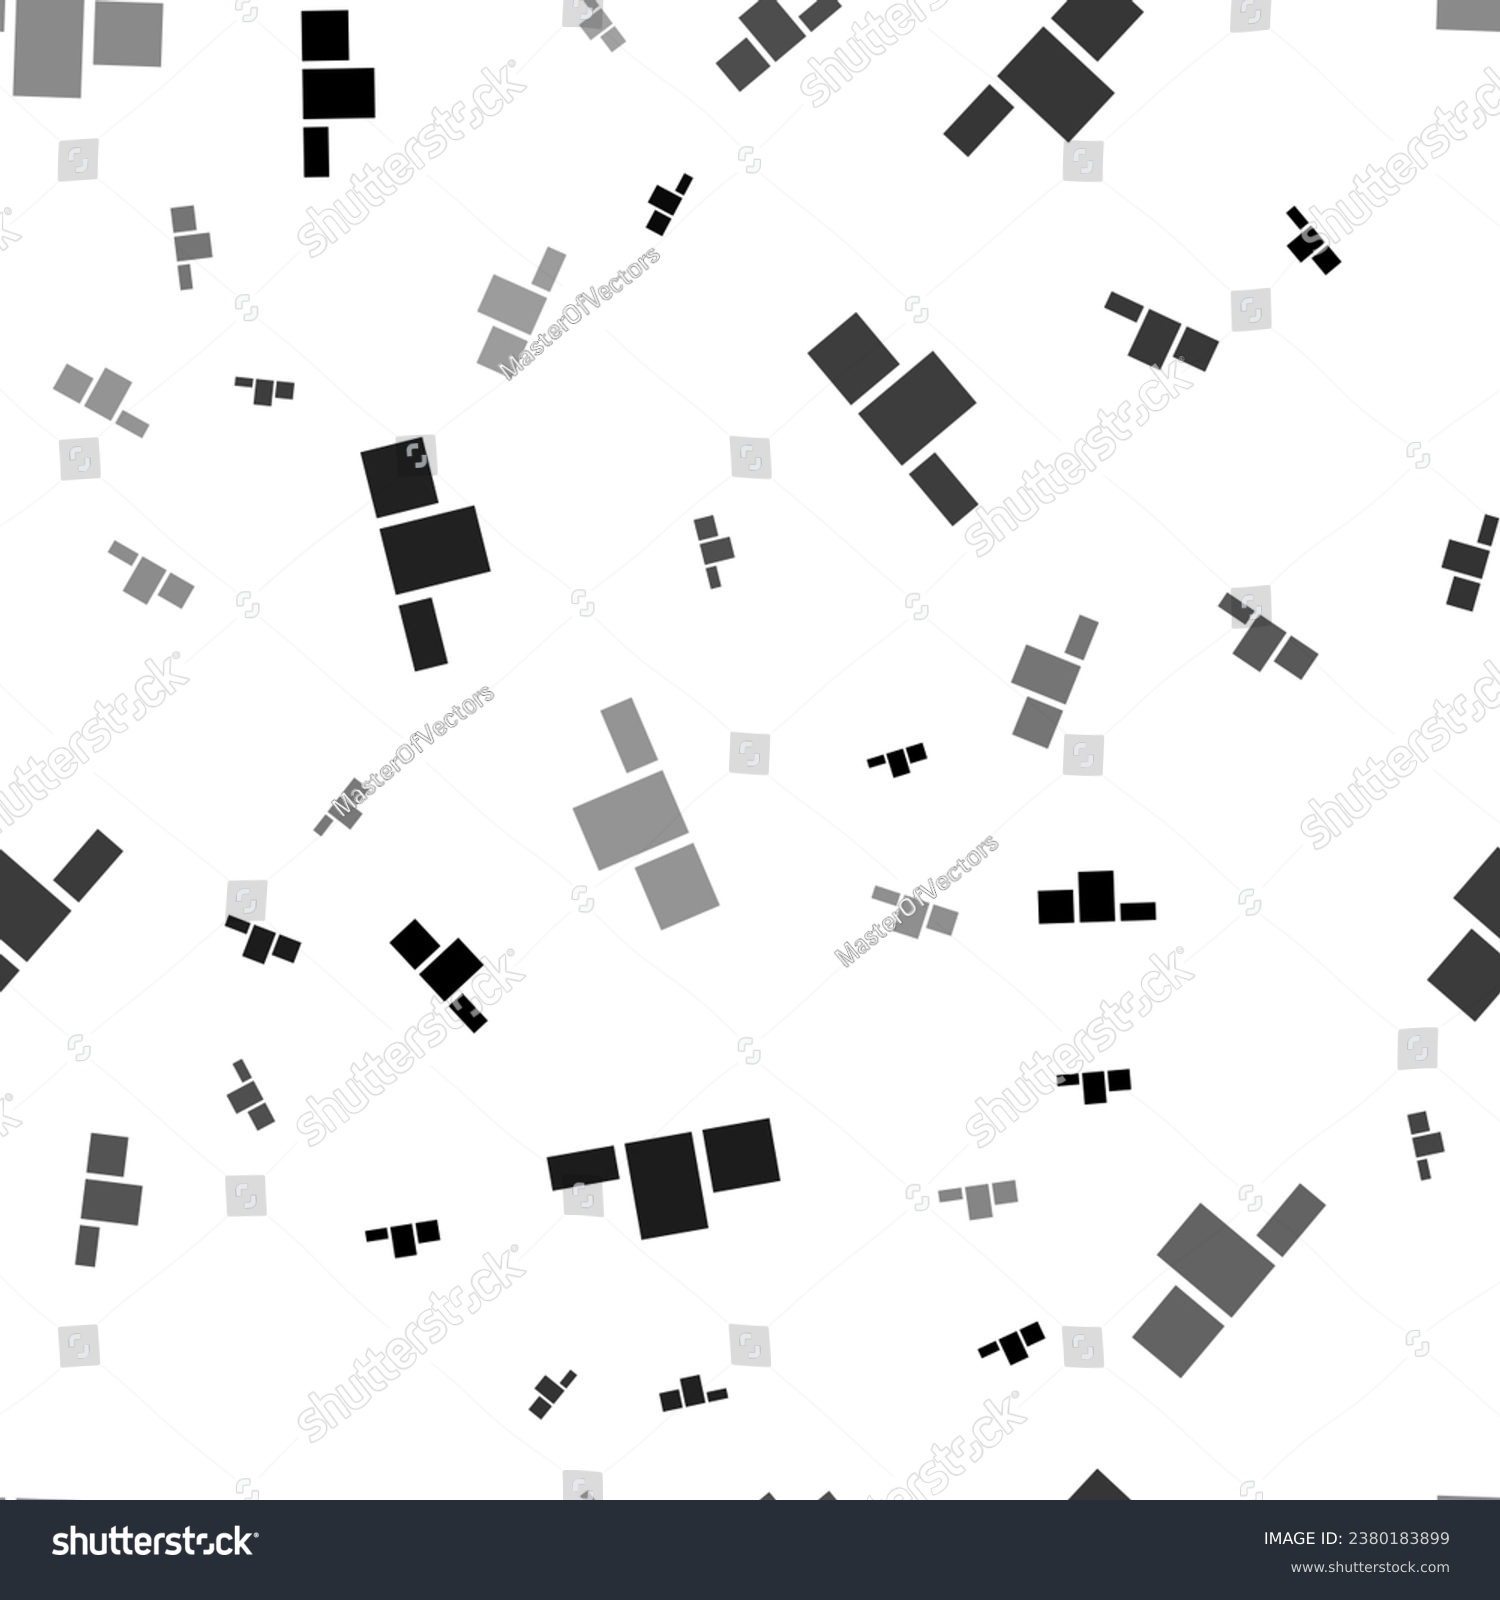 SVG of Seamless vector pattern with winners podium symbols, creating a creative monochrome background with rotated elements. Vector illustration on white background svg